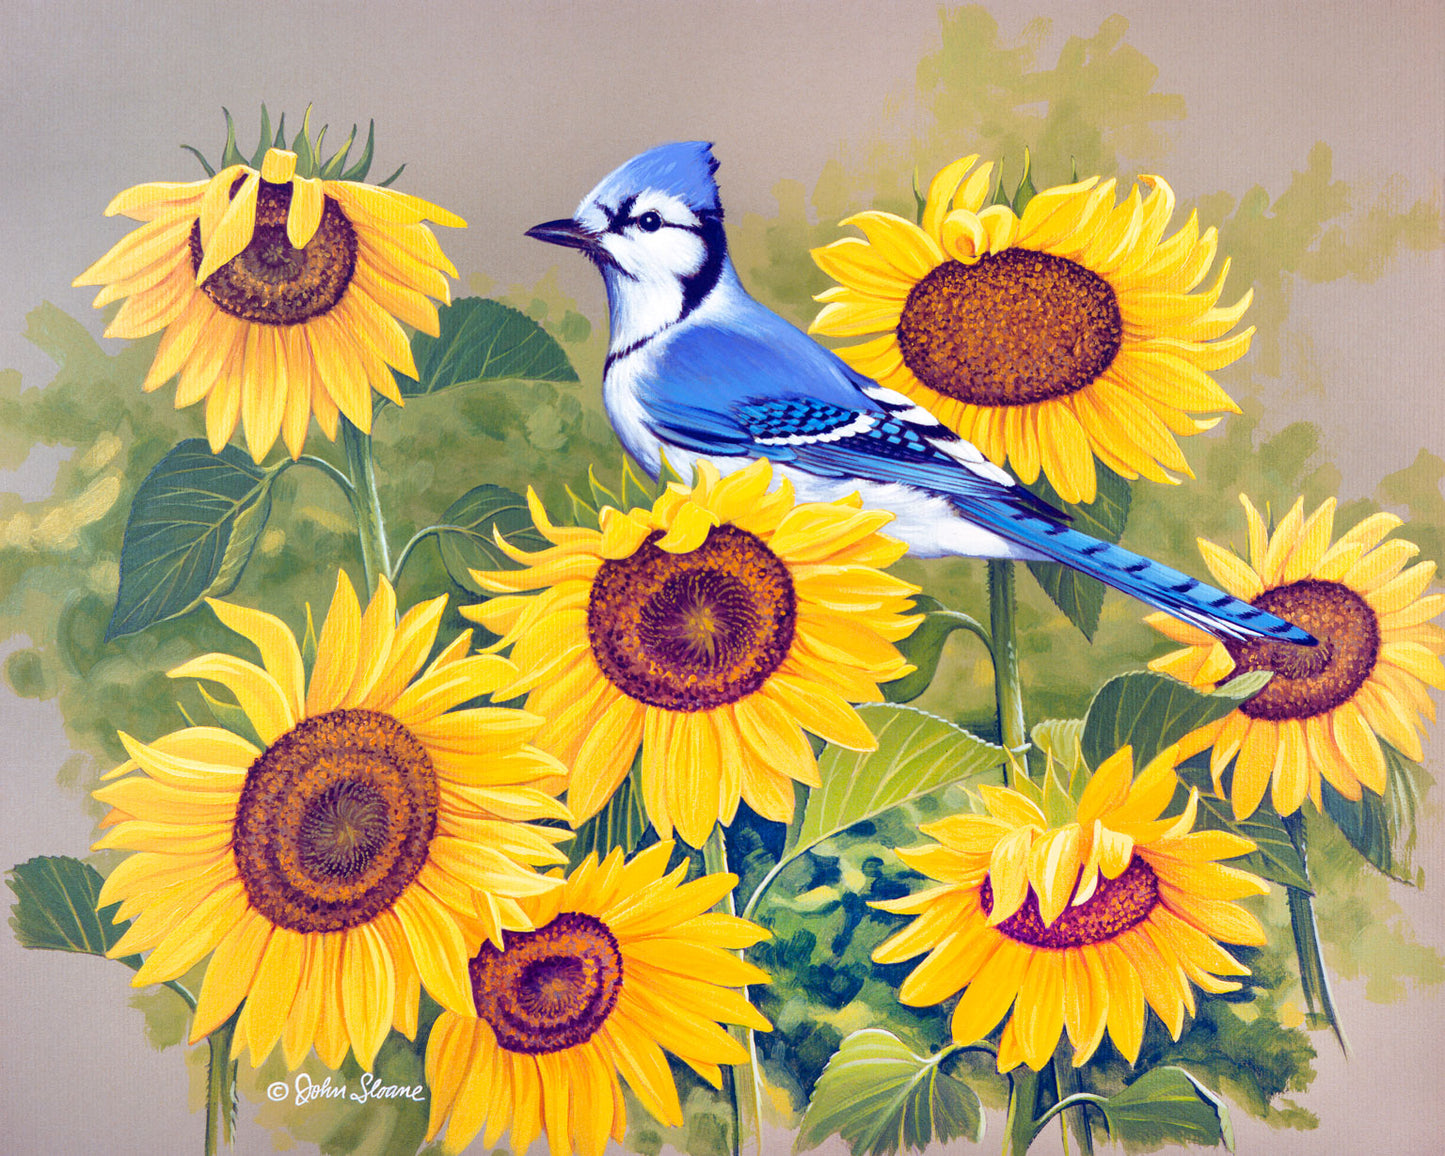 Bluejay and Sunflowers